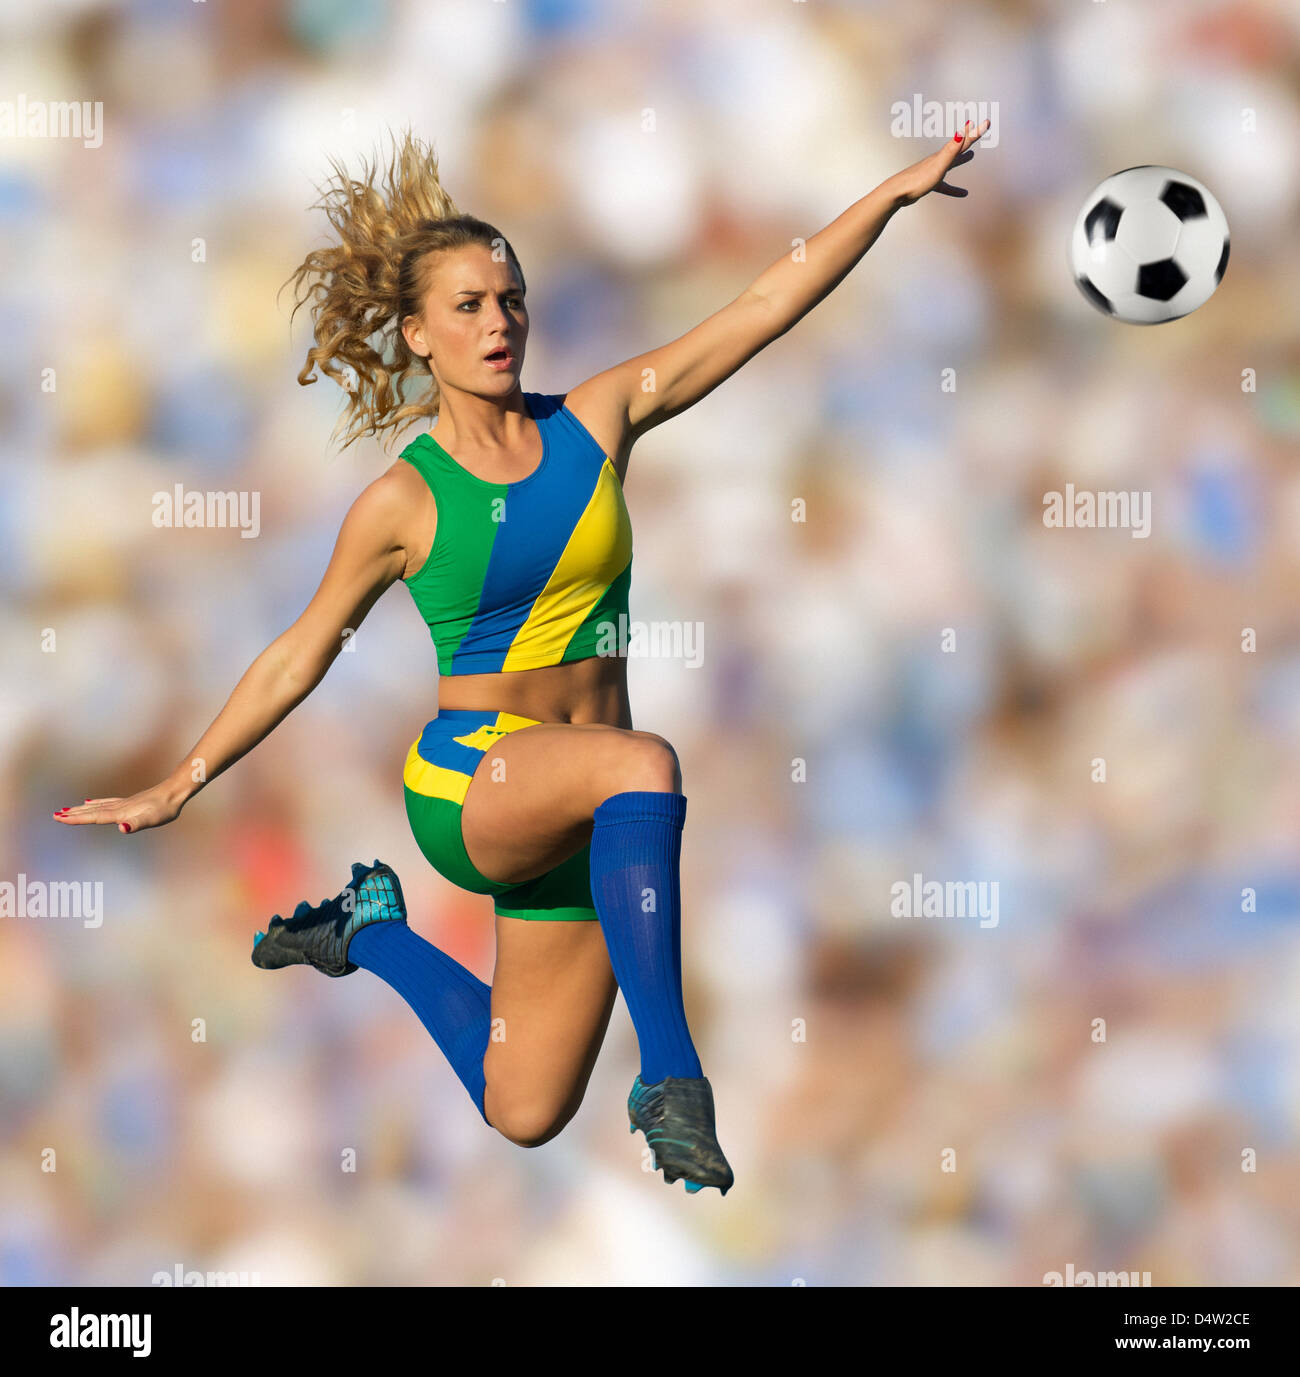 Brazilian soccer player in mid-air Stock Photo